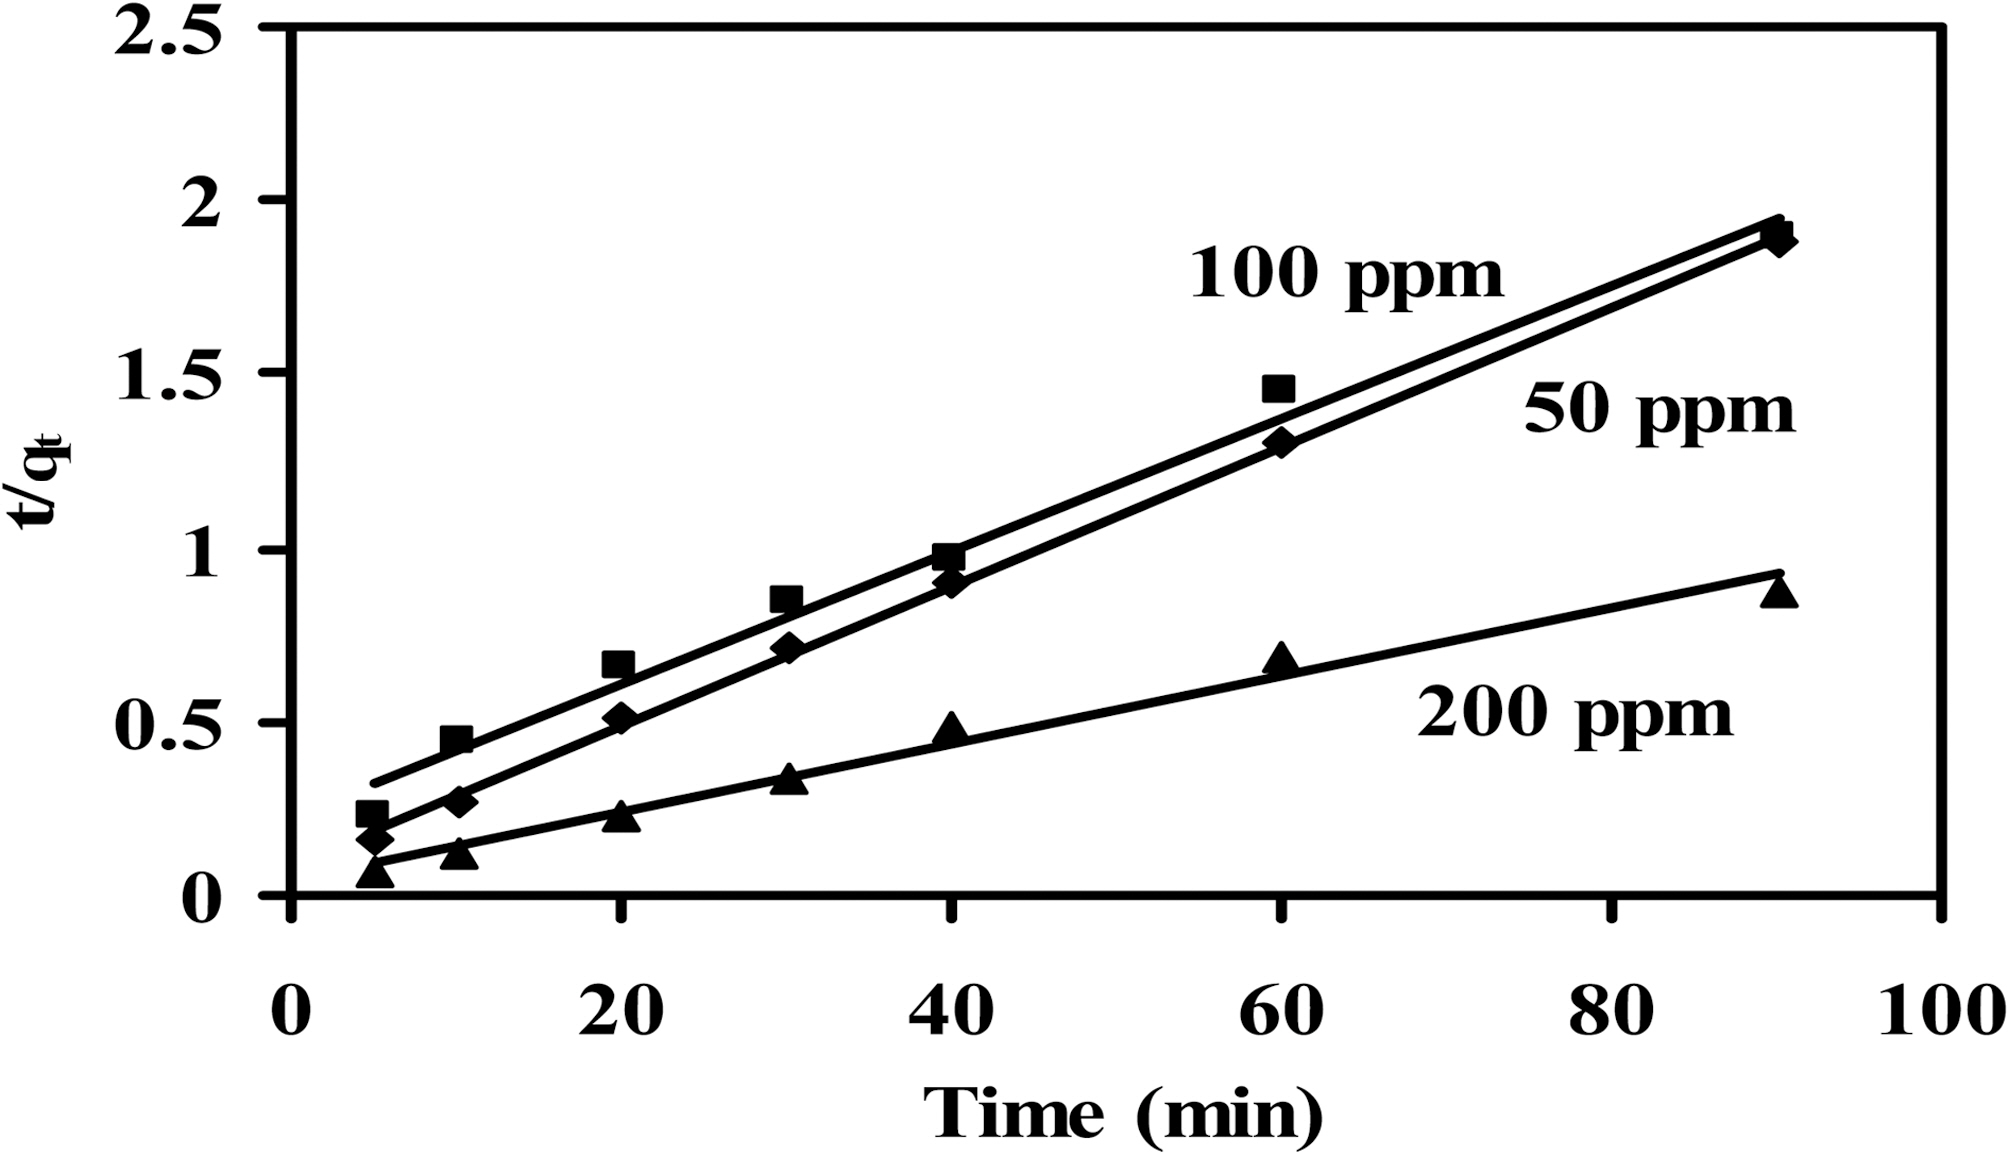 Pseudo-second-order kinetics for the adsorption of MB dye onto 200 mg of CCS-1K750.